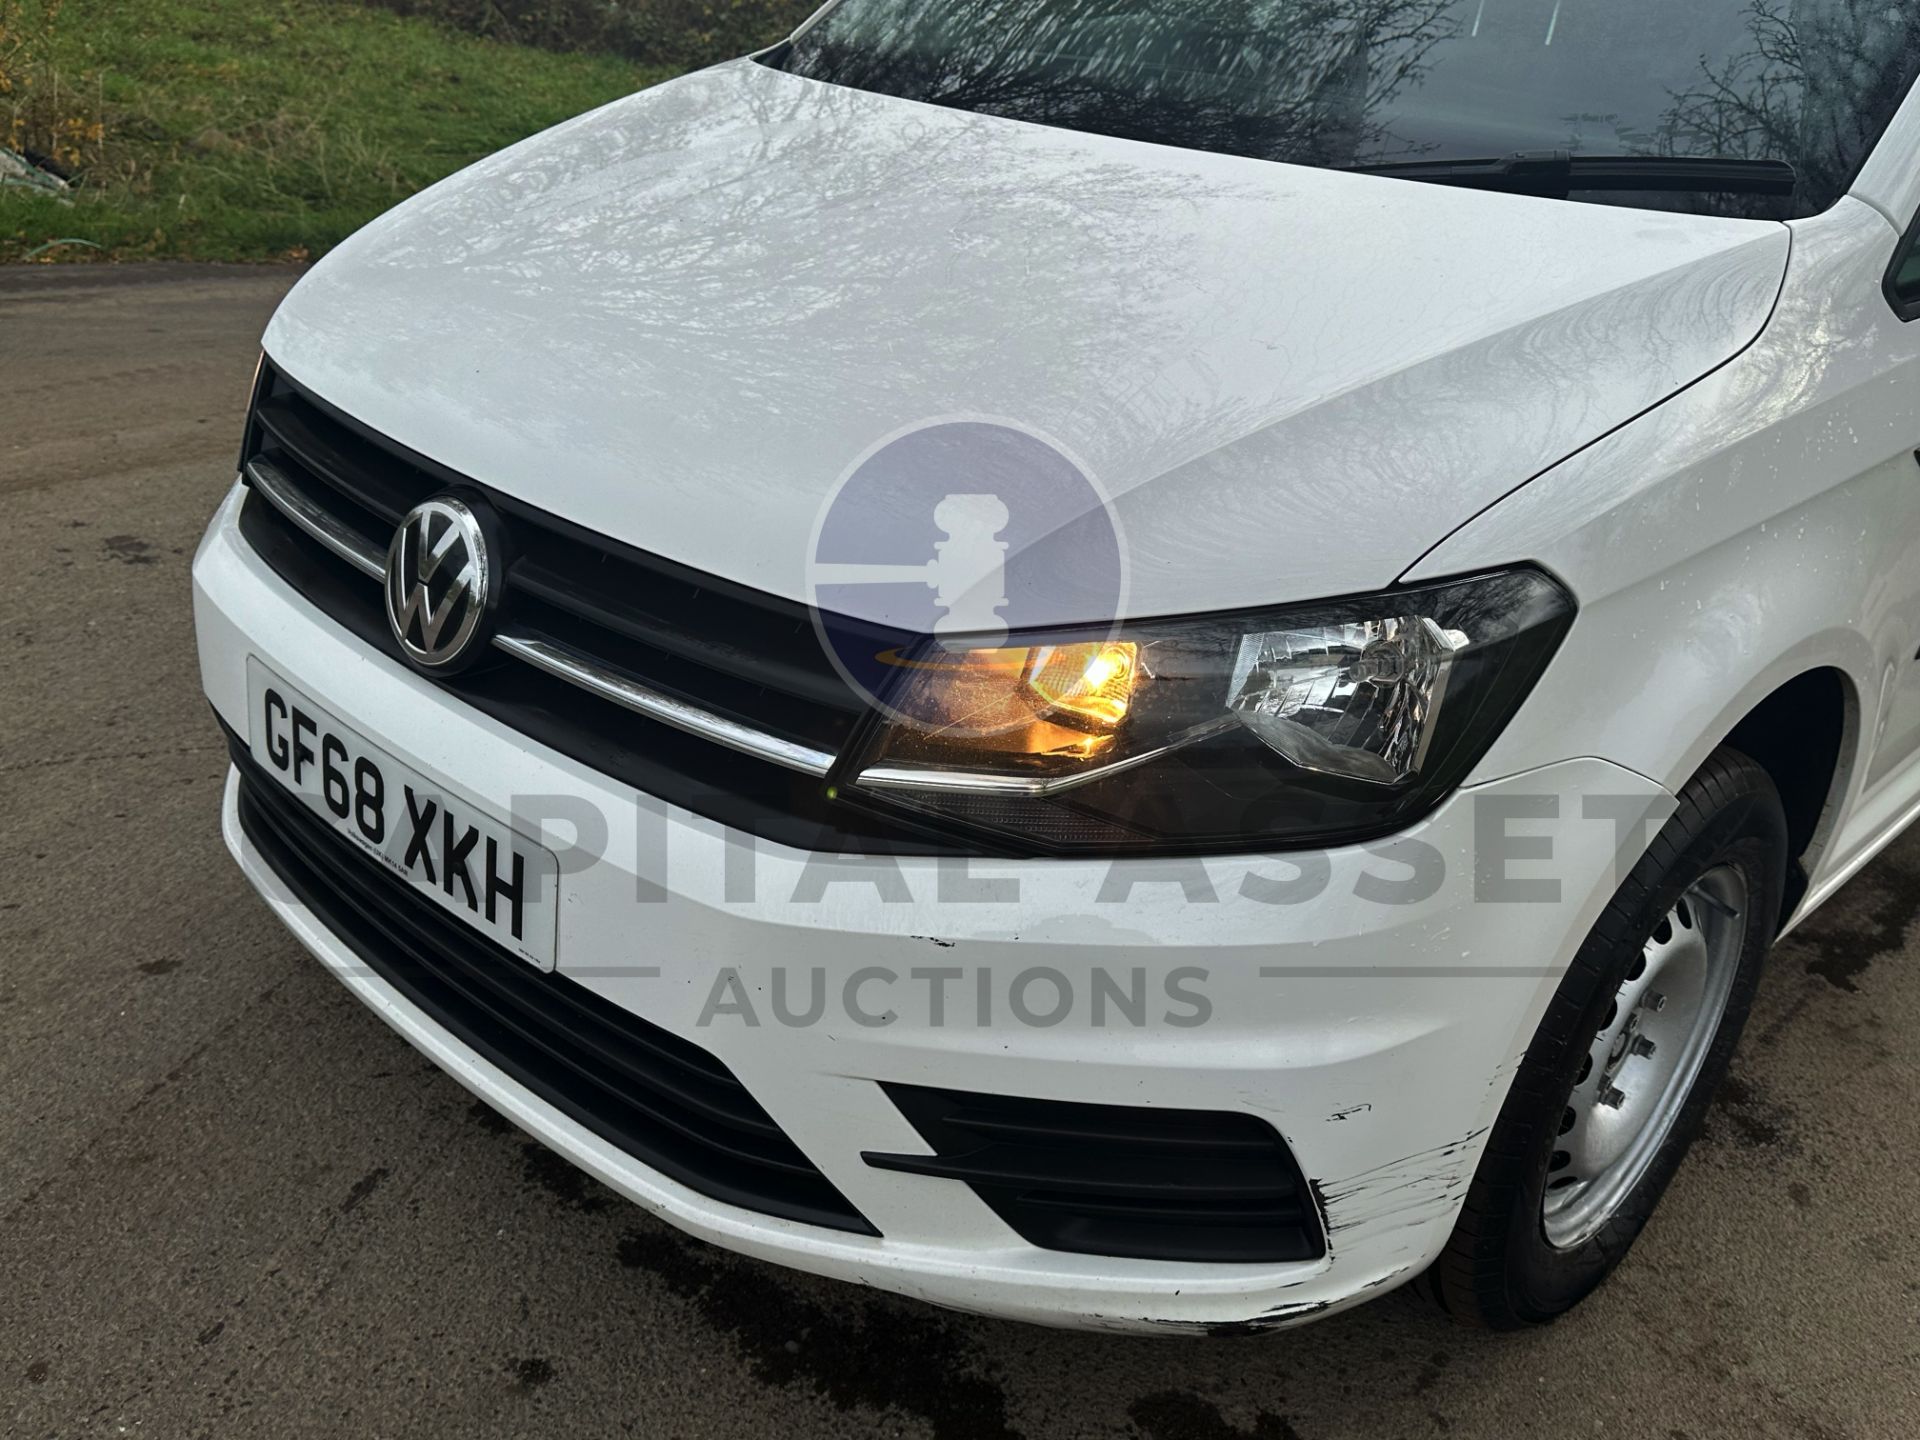 (On Sale) VOLKSWAGEN CADDY 2.0TDI BMT *TRENDLINE EDITION* 1 OWNER FSH (2019 MODEL) AIR CON - EURO 6 - Image 15 of 38